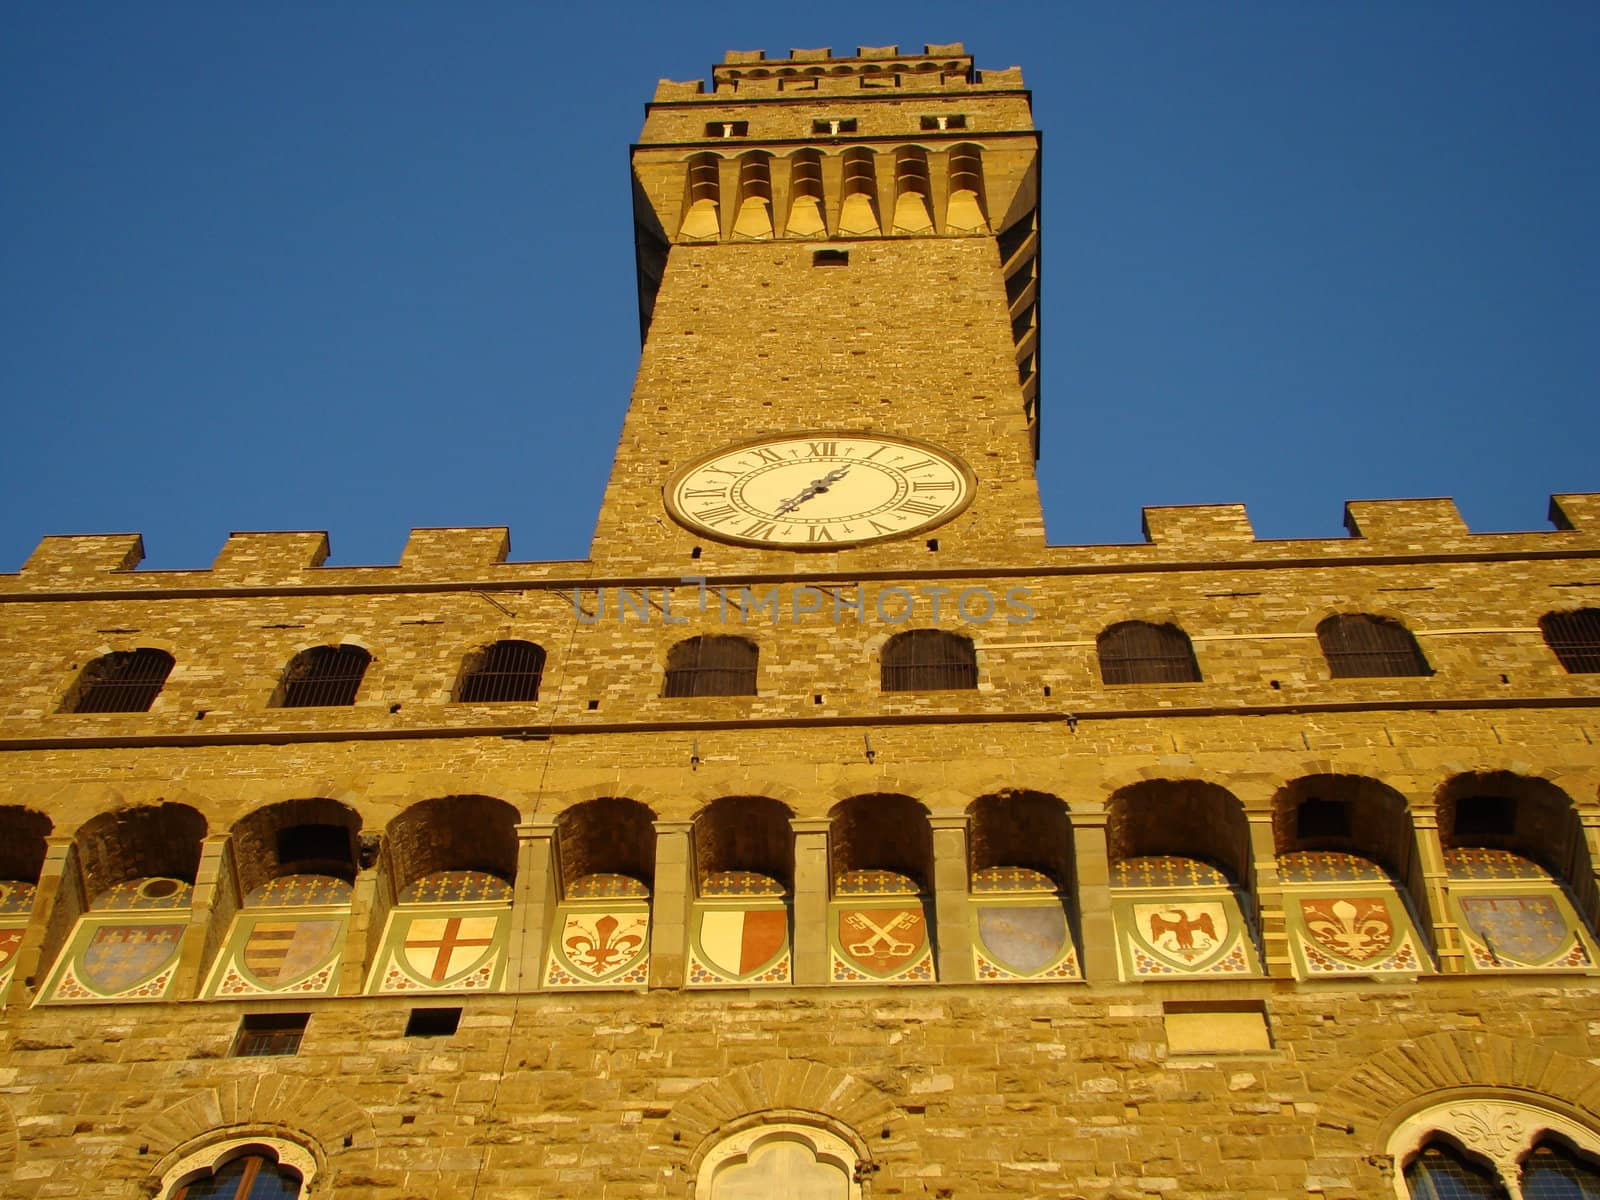 Palazzo Vecchio on Piazza Signoria in Florence town hall and museum. Tuscany,Italy.